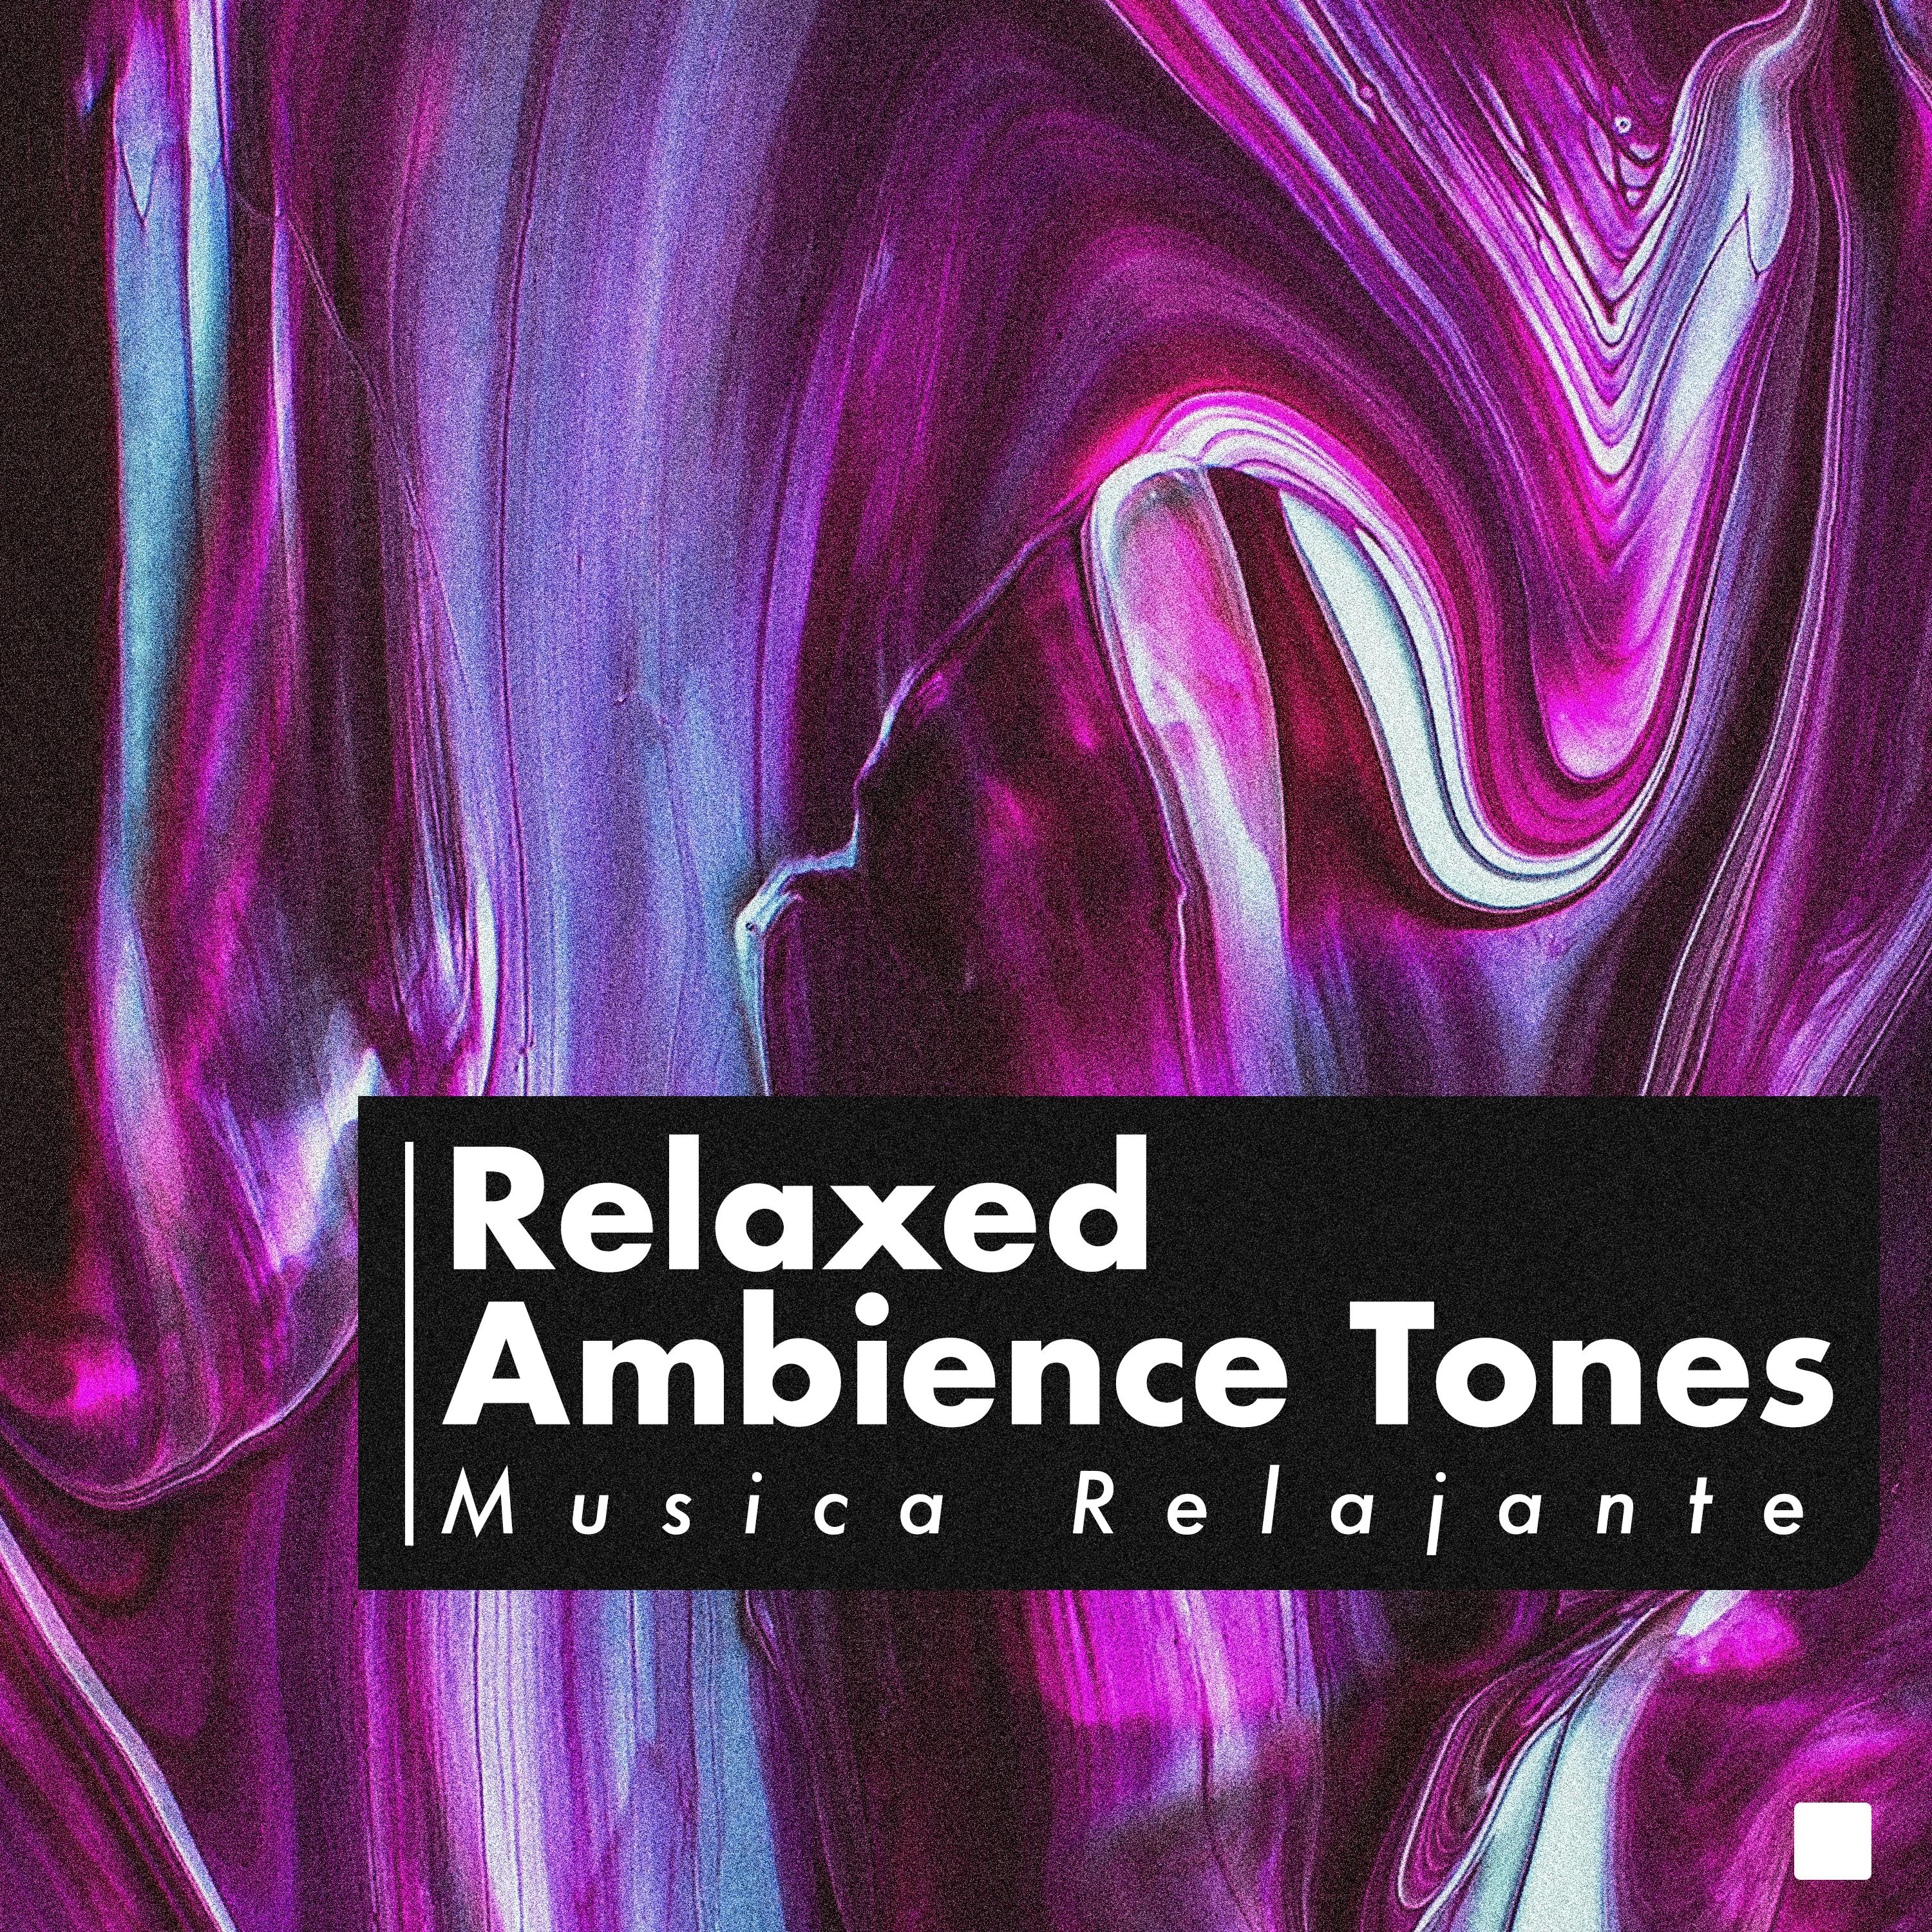 Relaxed Ambience Tones